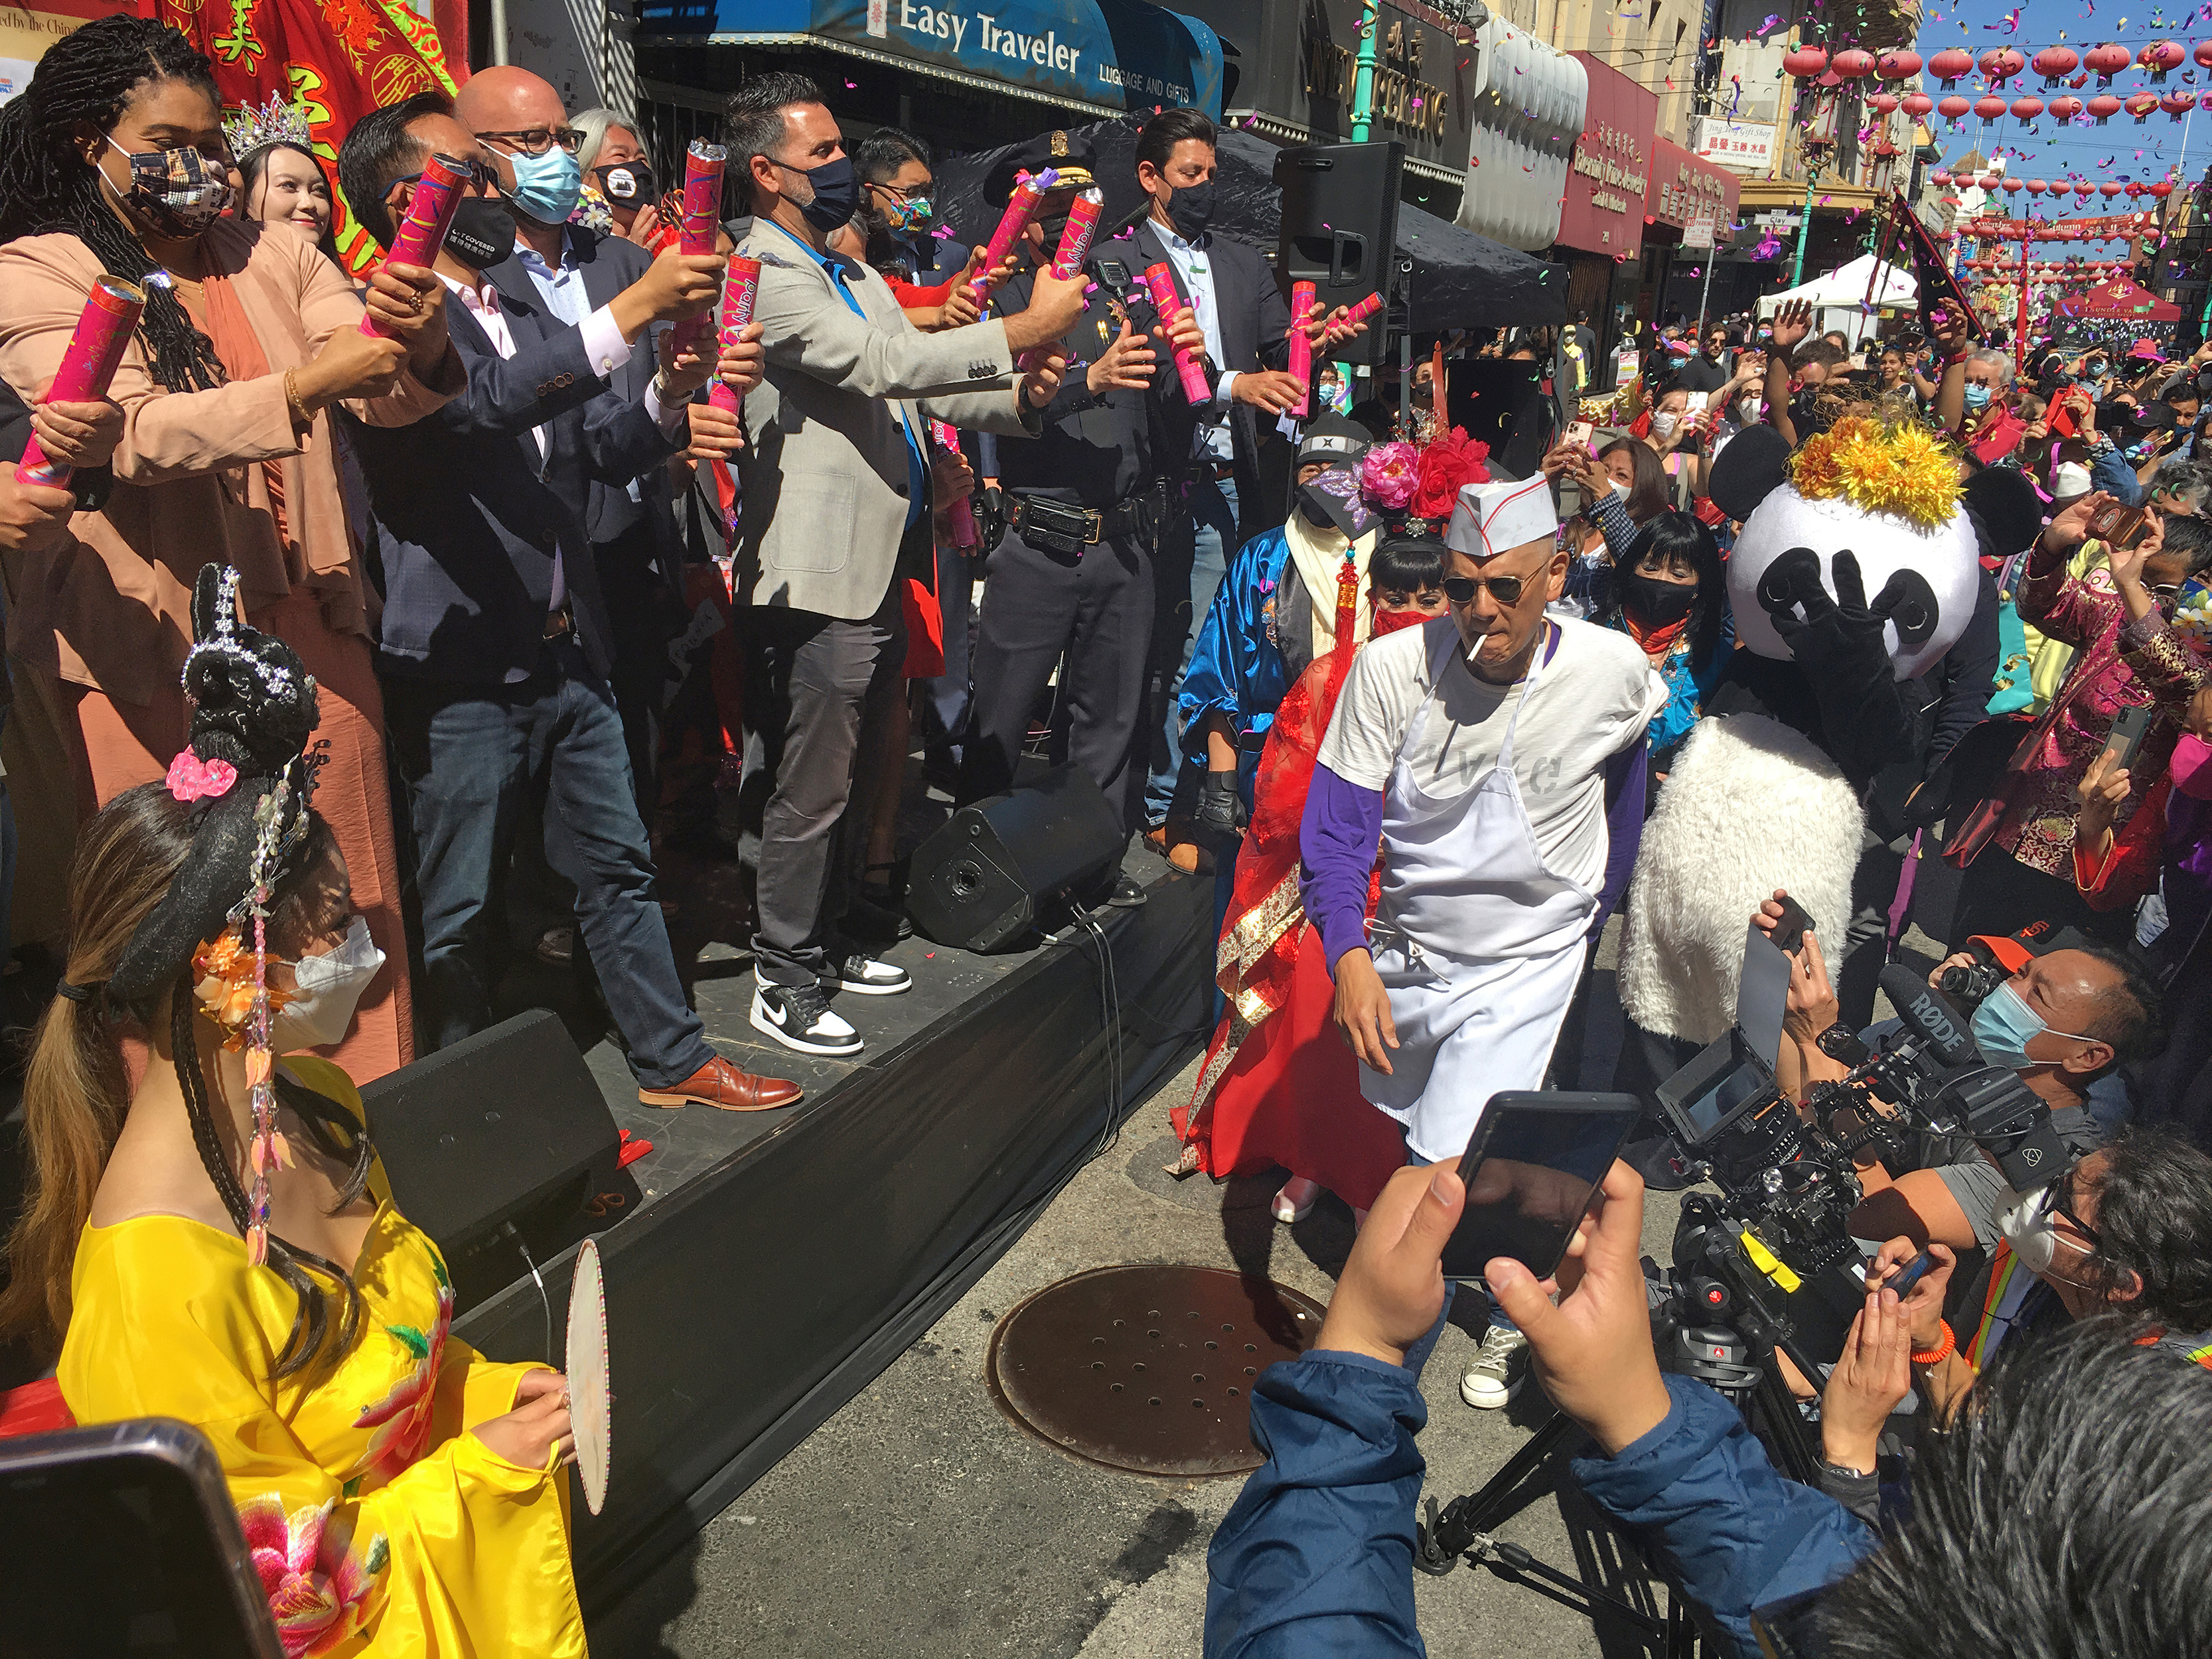 Chef Jang at the Autumn Moon Festival, San Francisco Chinatown, 2021. Photograph by Brent Willson